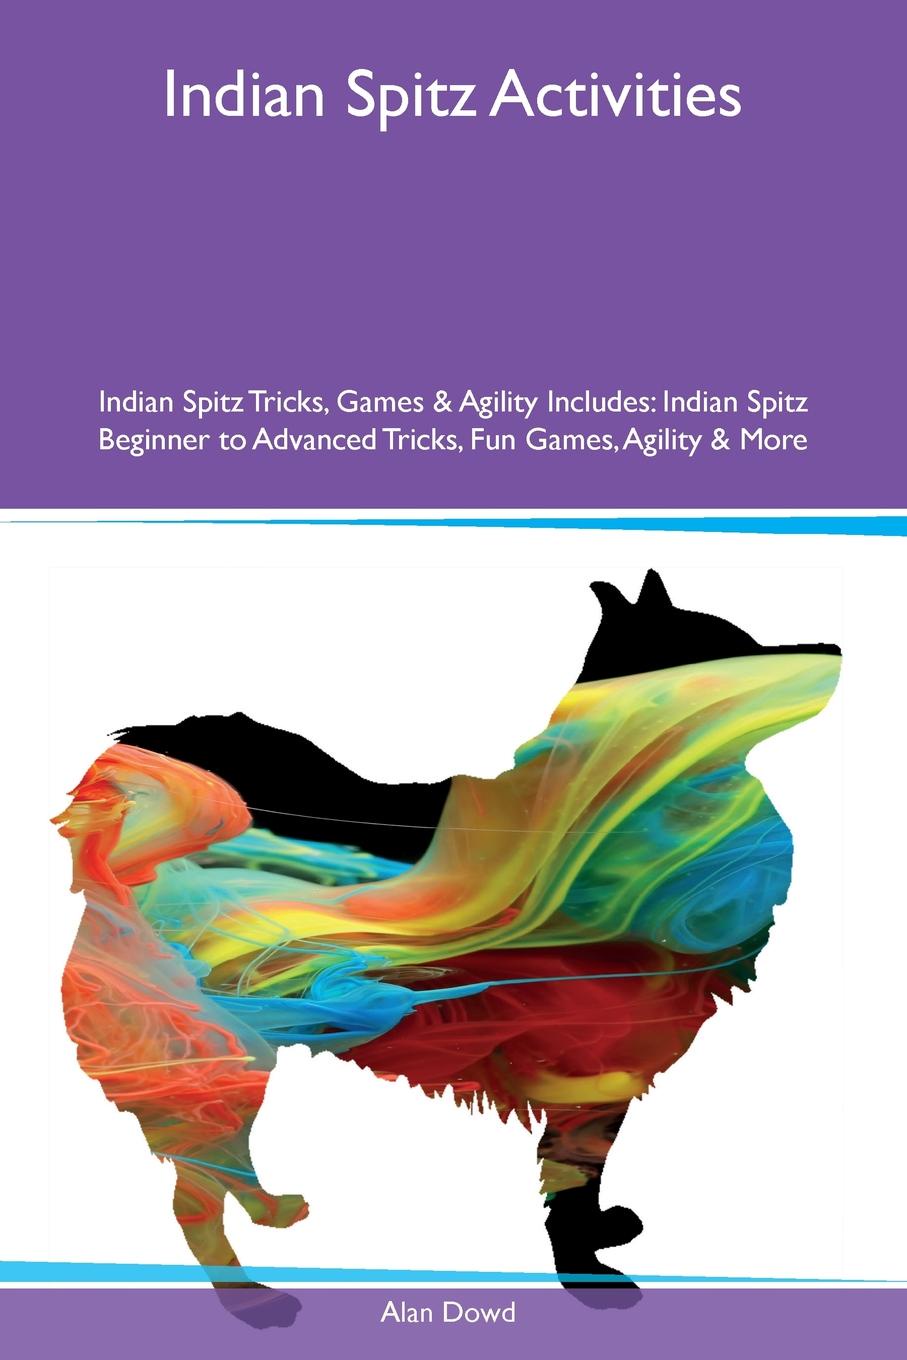 Indian Spitz Activities Indian Spitz Tricks, Games & Agility Includes. Indian Spitz Beginner to Advanced Tricks, Fun Games, Agility & More